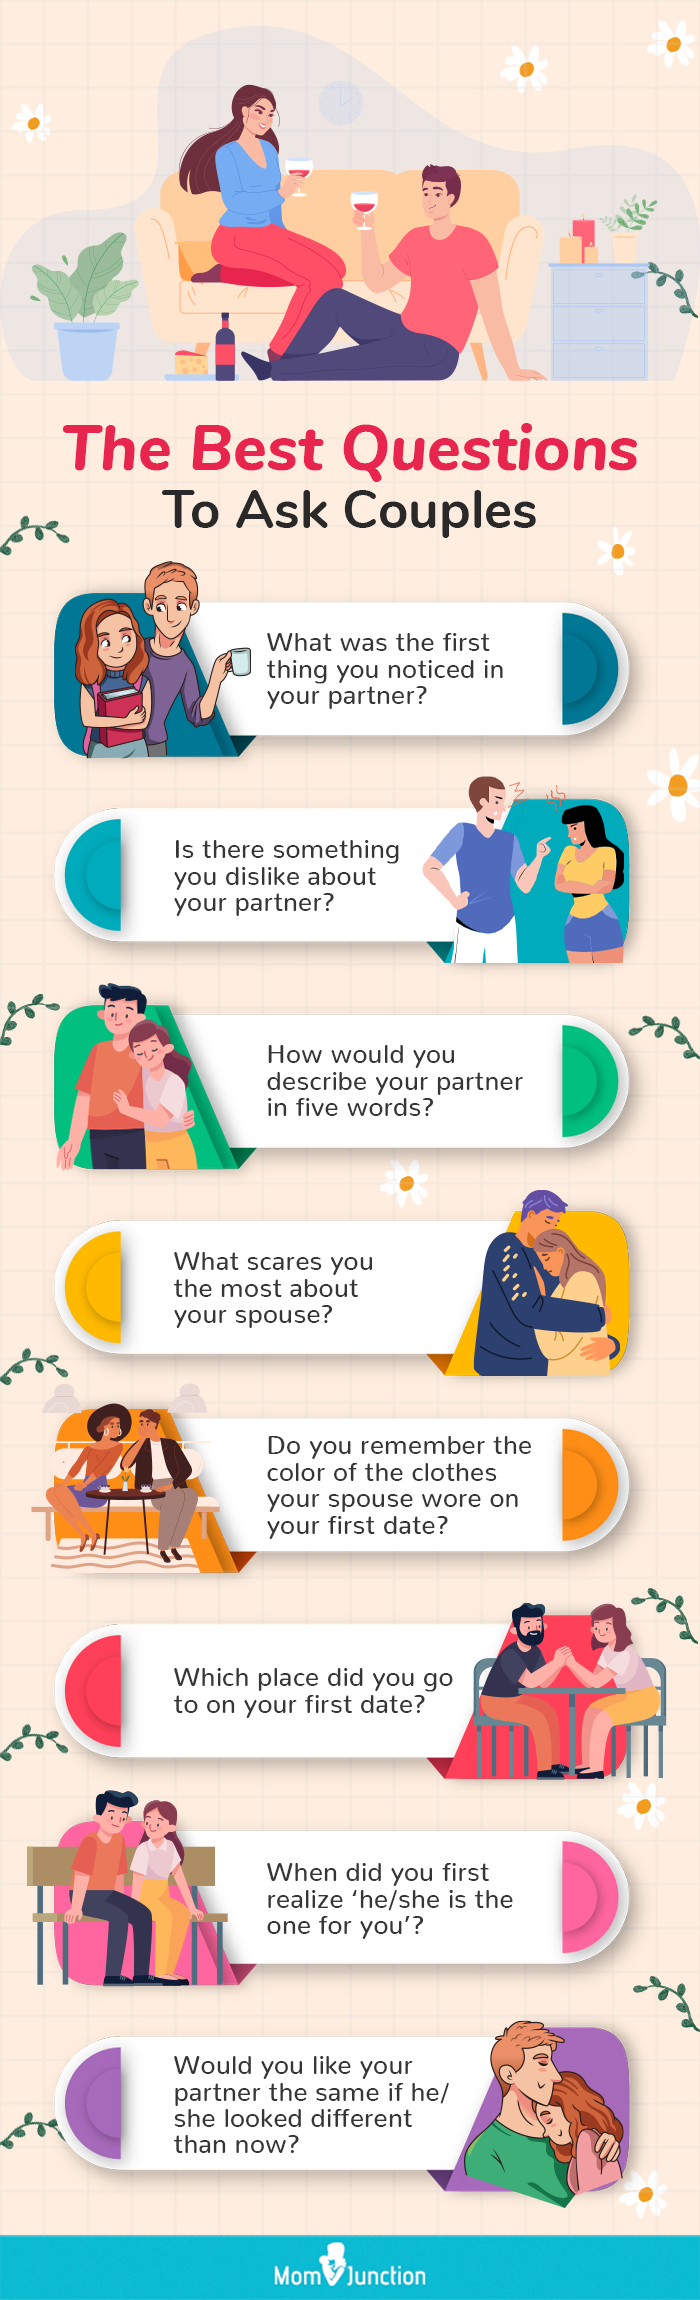 best questions to ask couples (infographic)